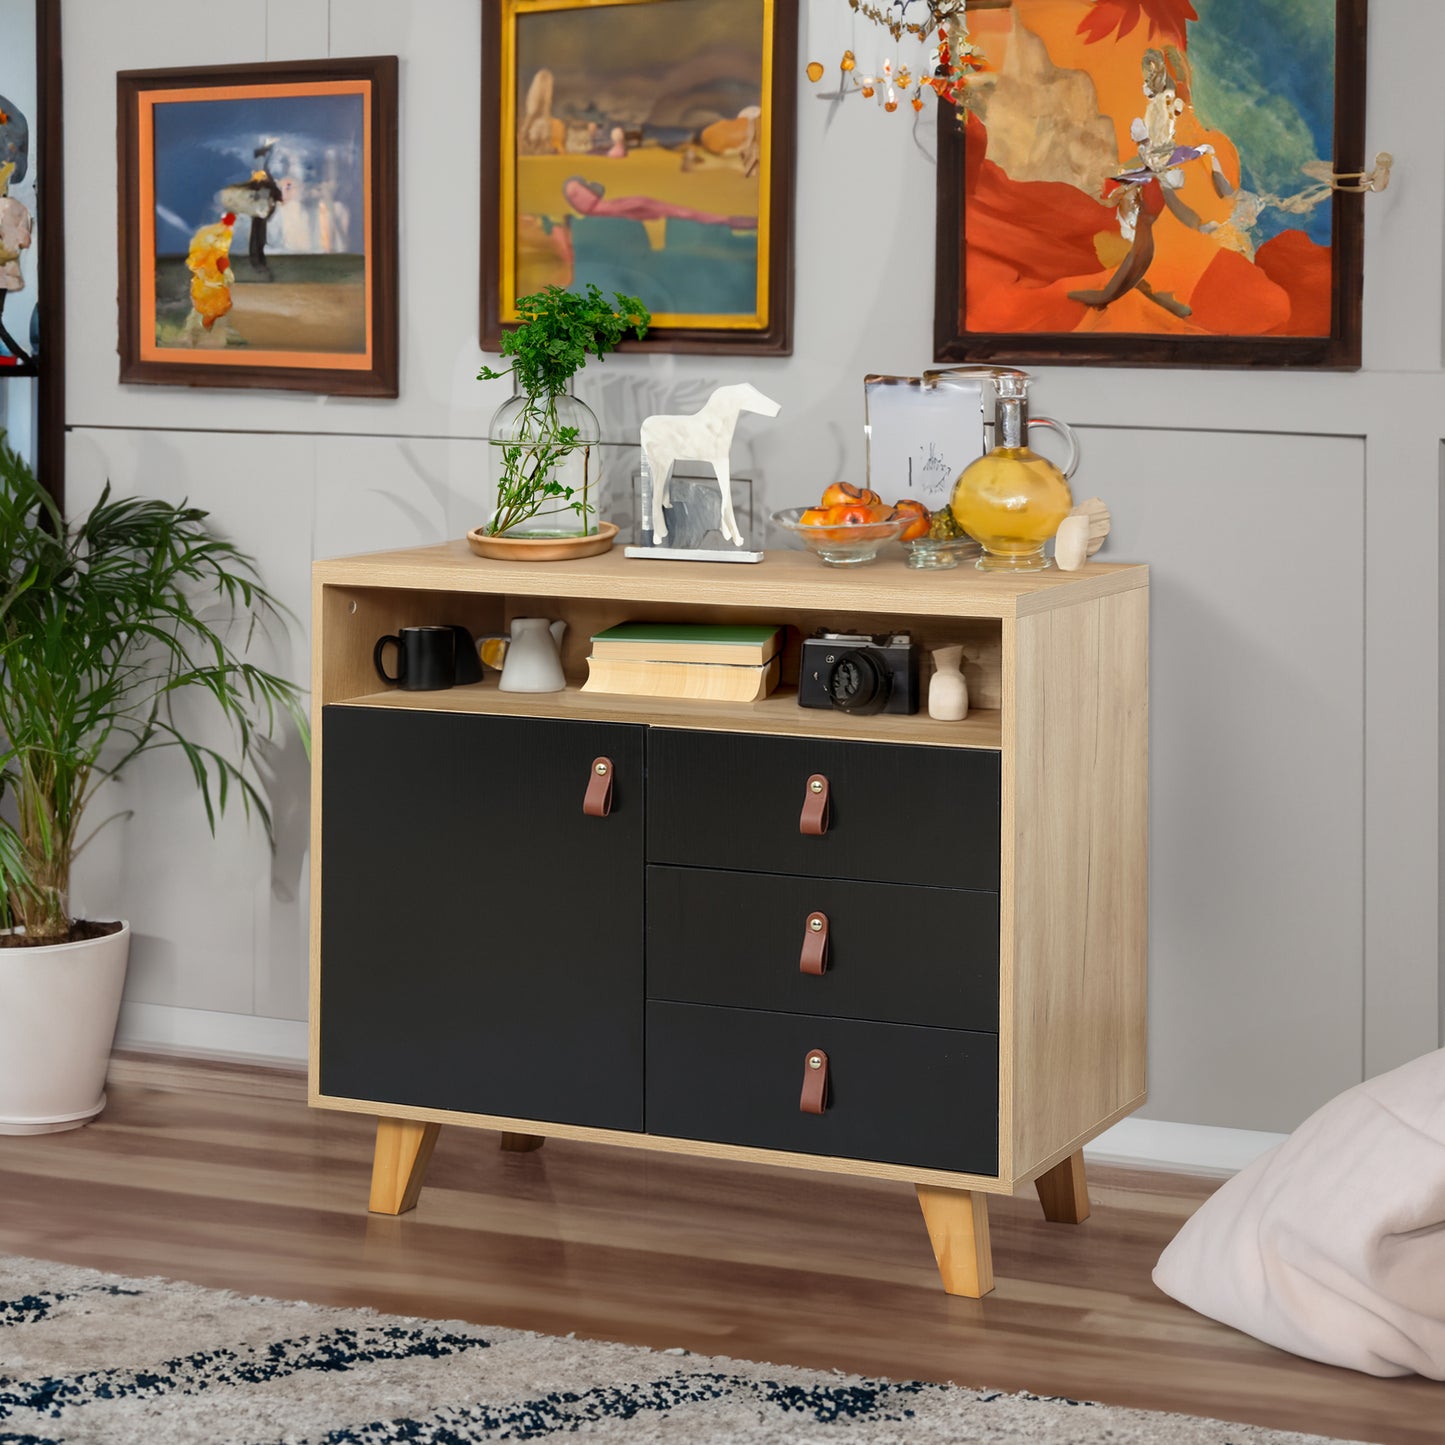 DRESSER CABINET BAR CABINET storge cabinet lockers PUHold handsLockers can be placed in the living room, bedroom, dining room, black+brown